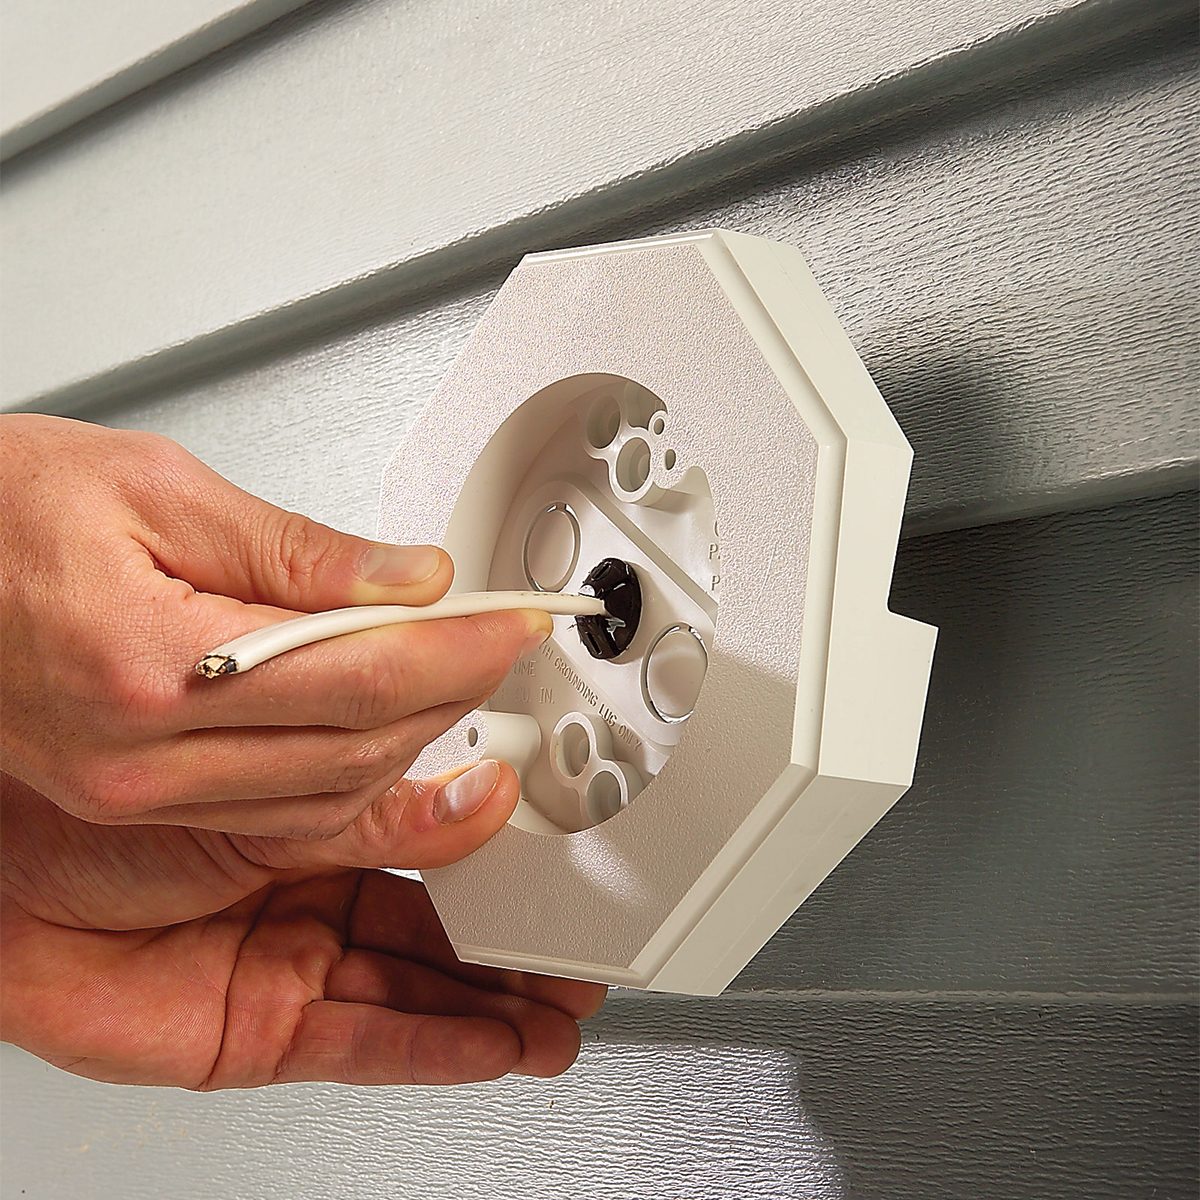 How You Can Mount Lights On Vinyl Siding Fh06apr 467 05 016